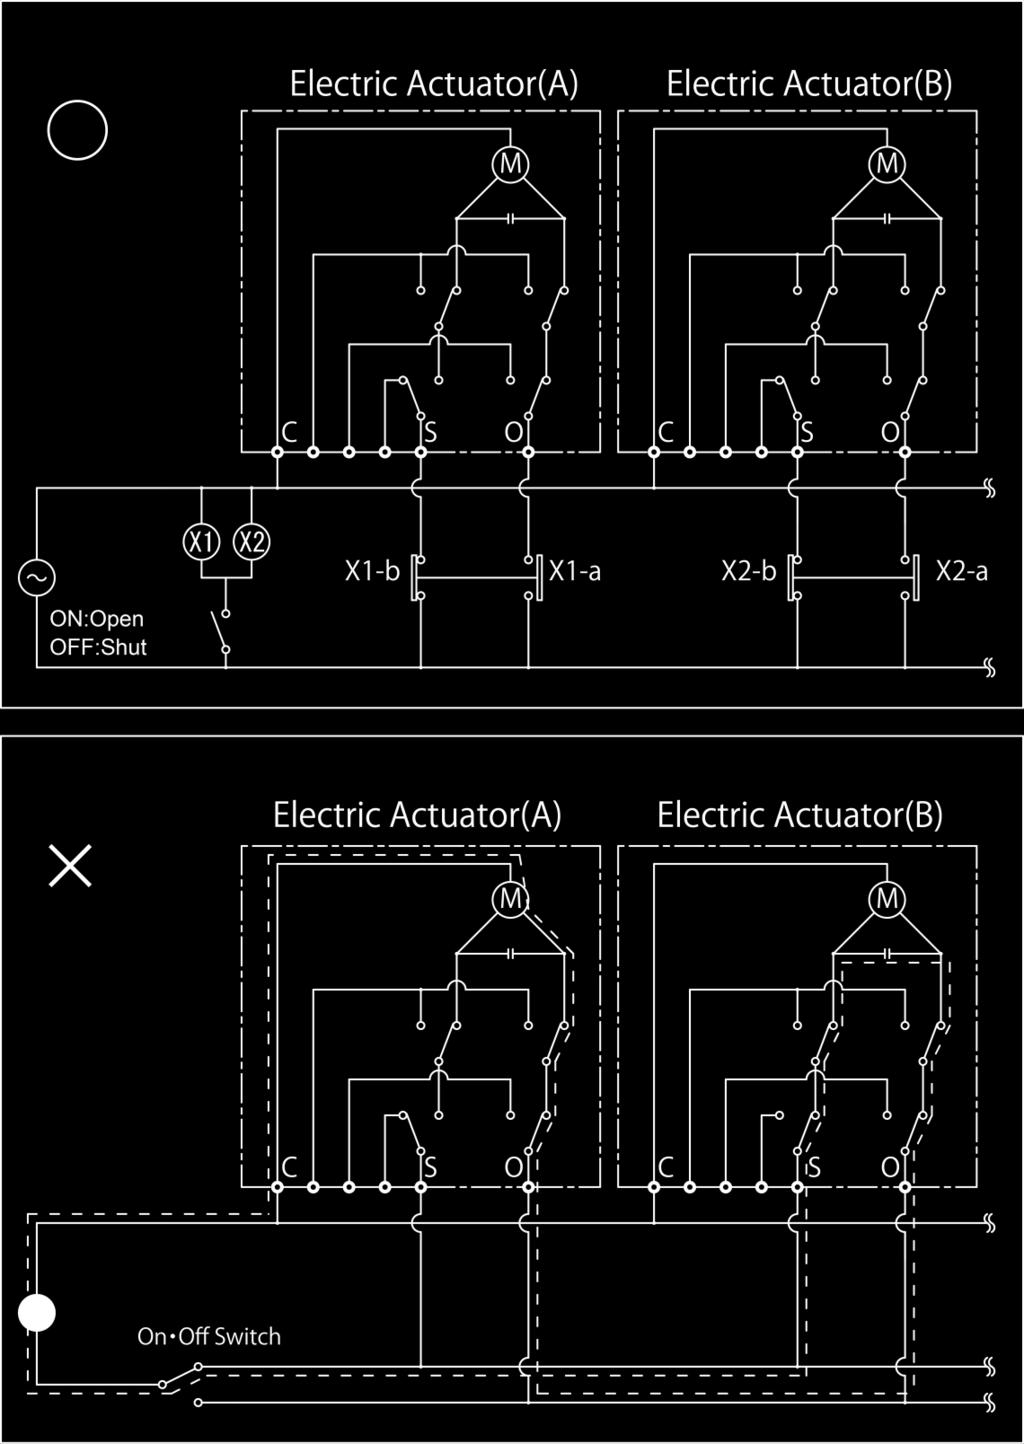 Do not use electrical connections that enable simultaneous operation of multiple electric actuated valves arranged in parallel using one on/off switch (or contact relay) (See Figure-2).